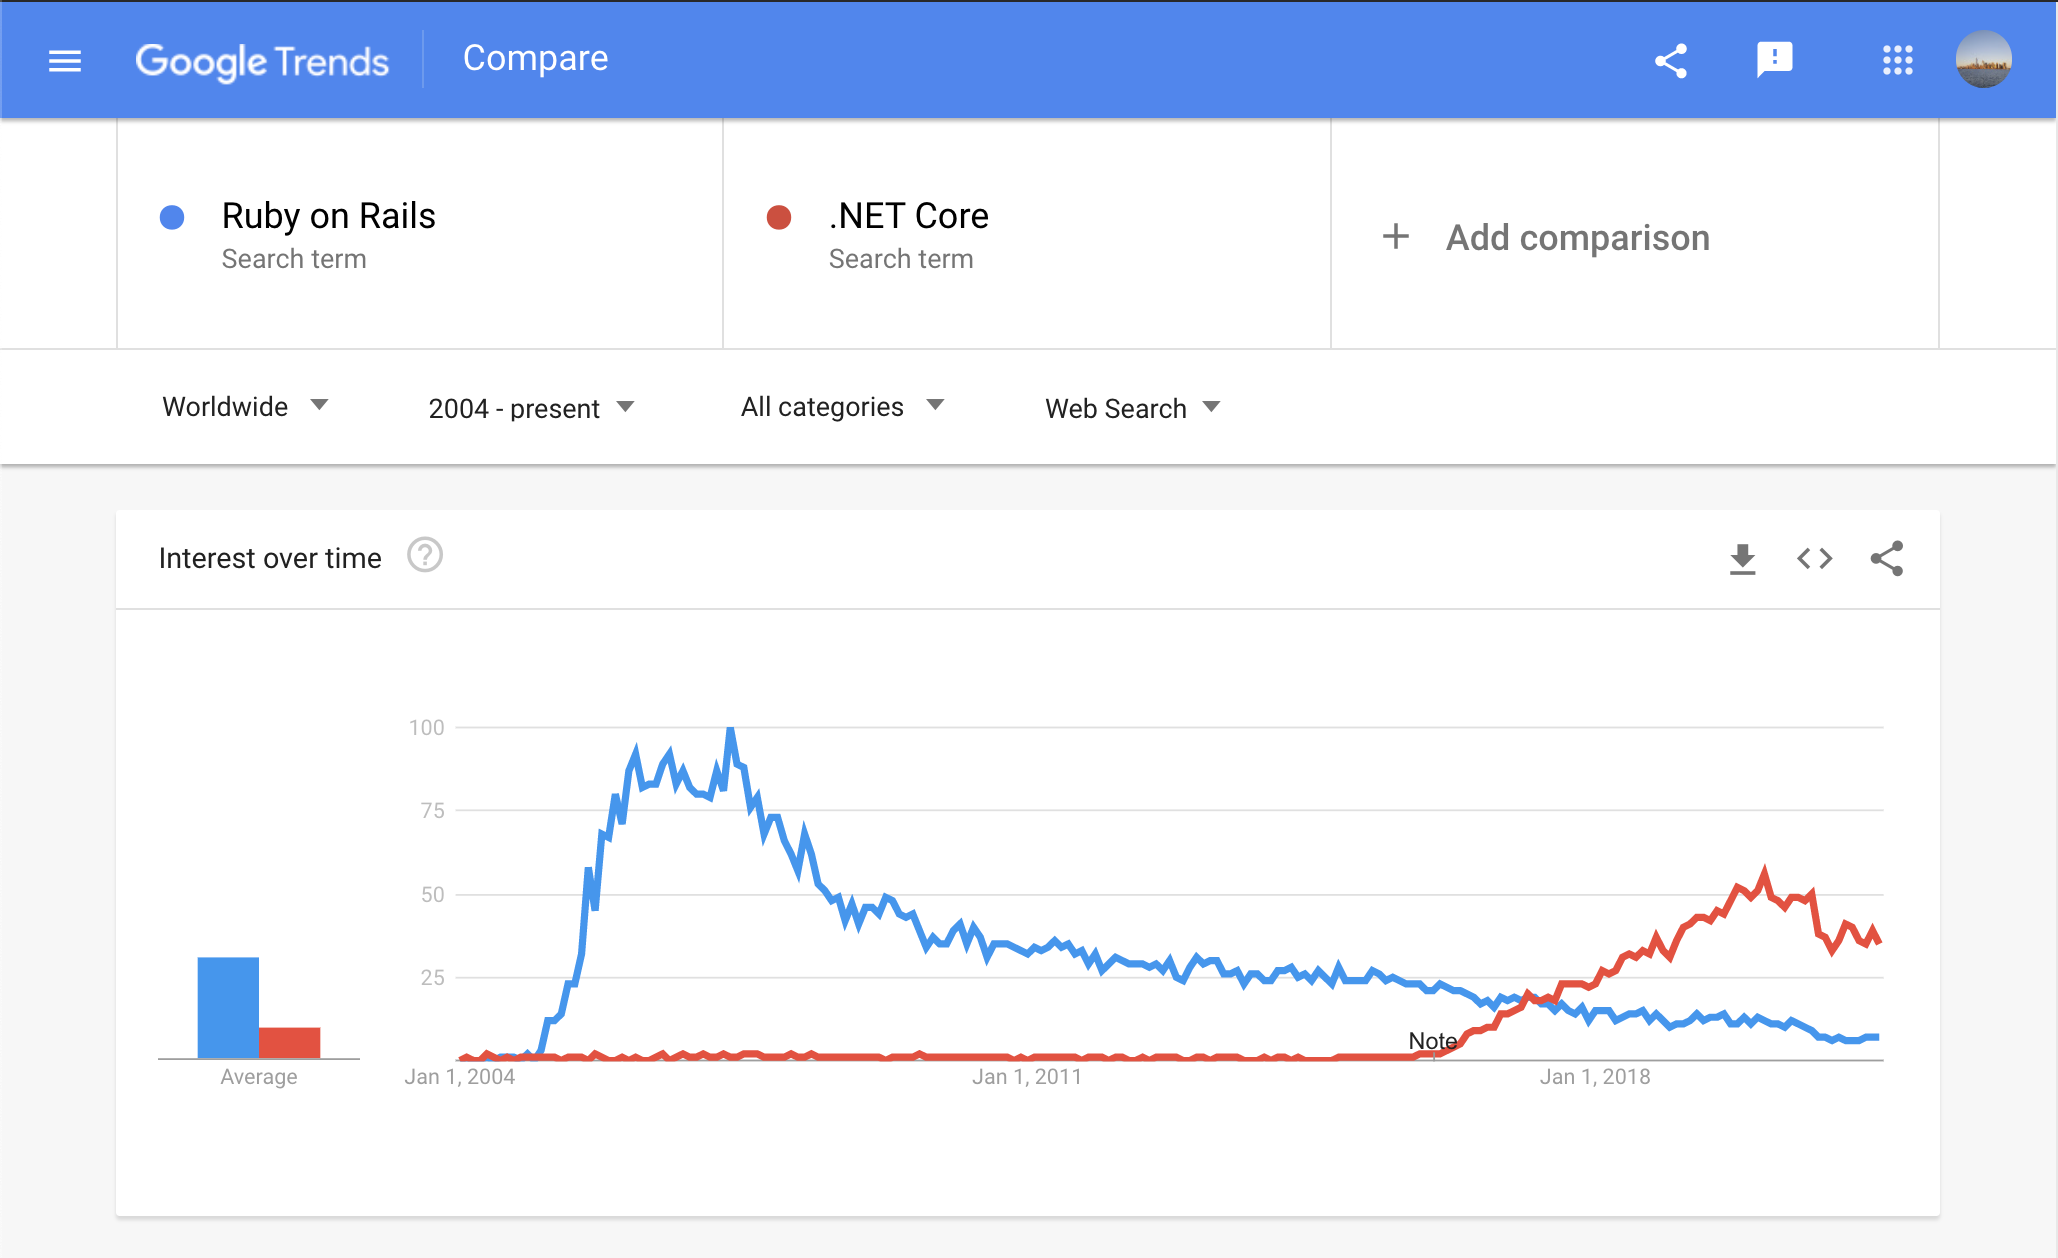 Google Trends Comparing .NET Core and Ruby on Rails